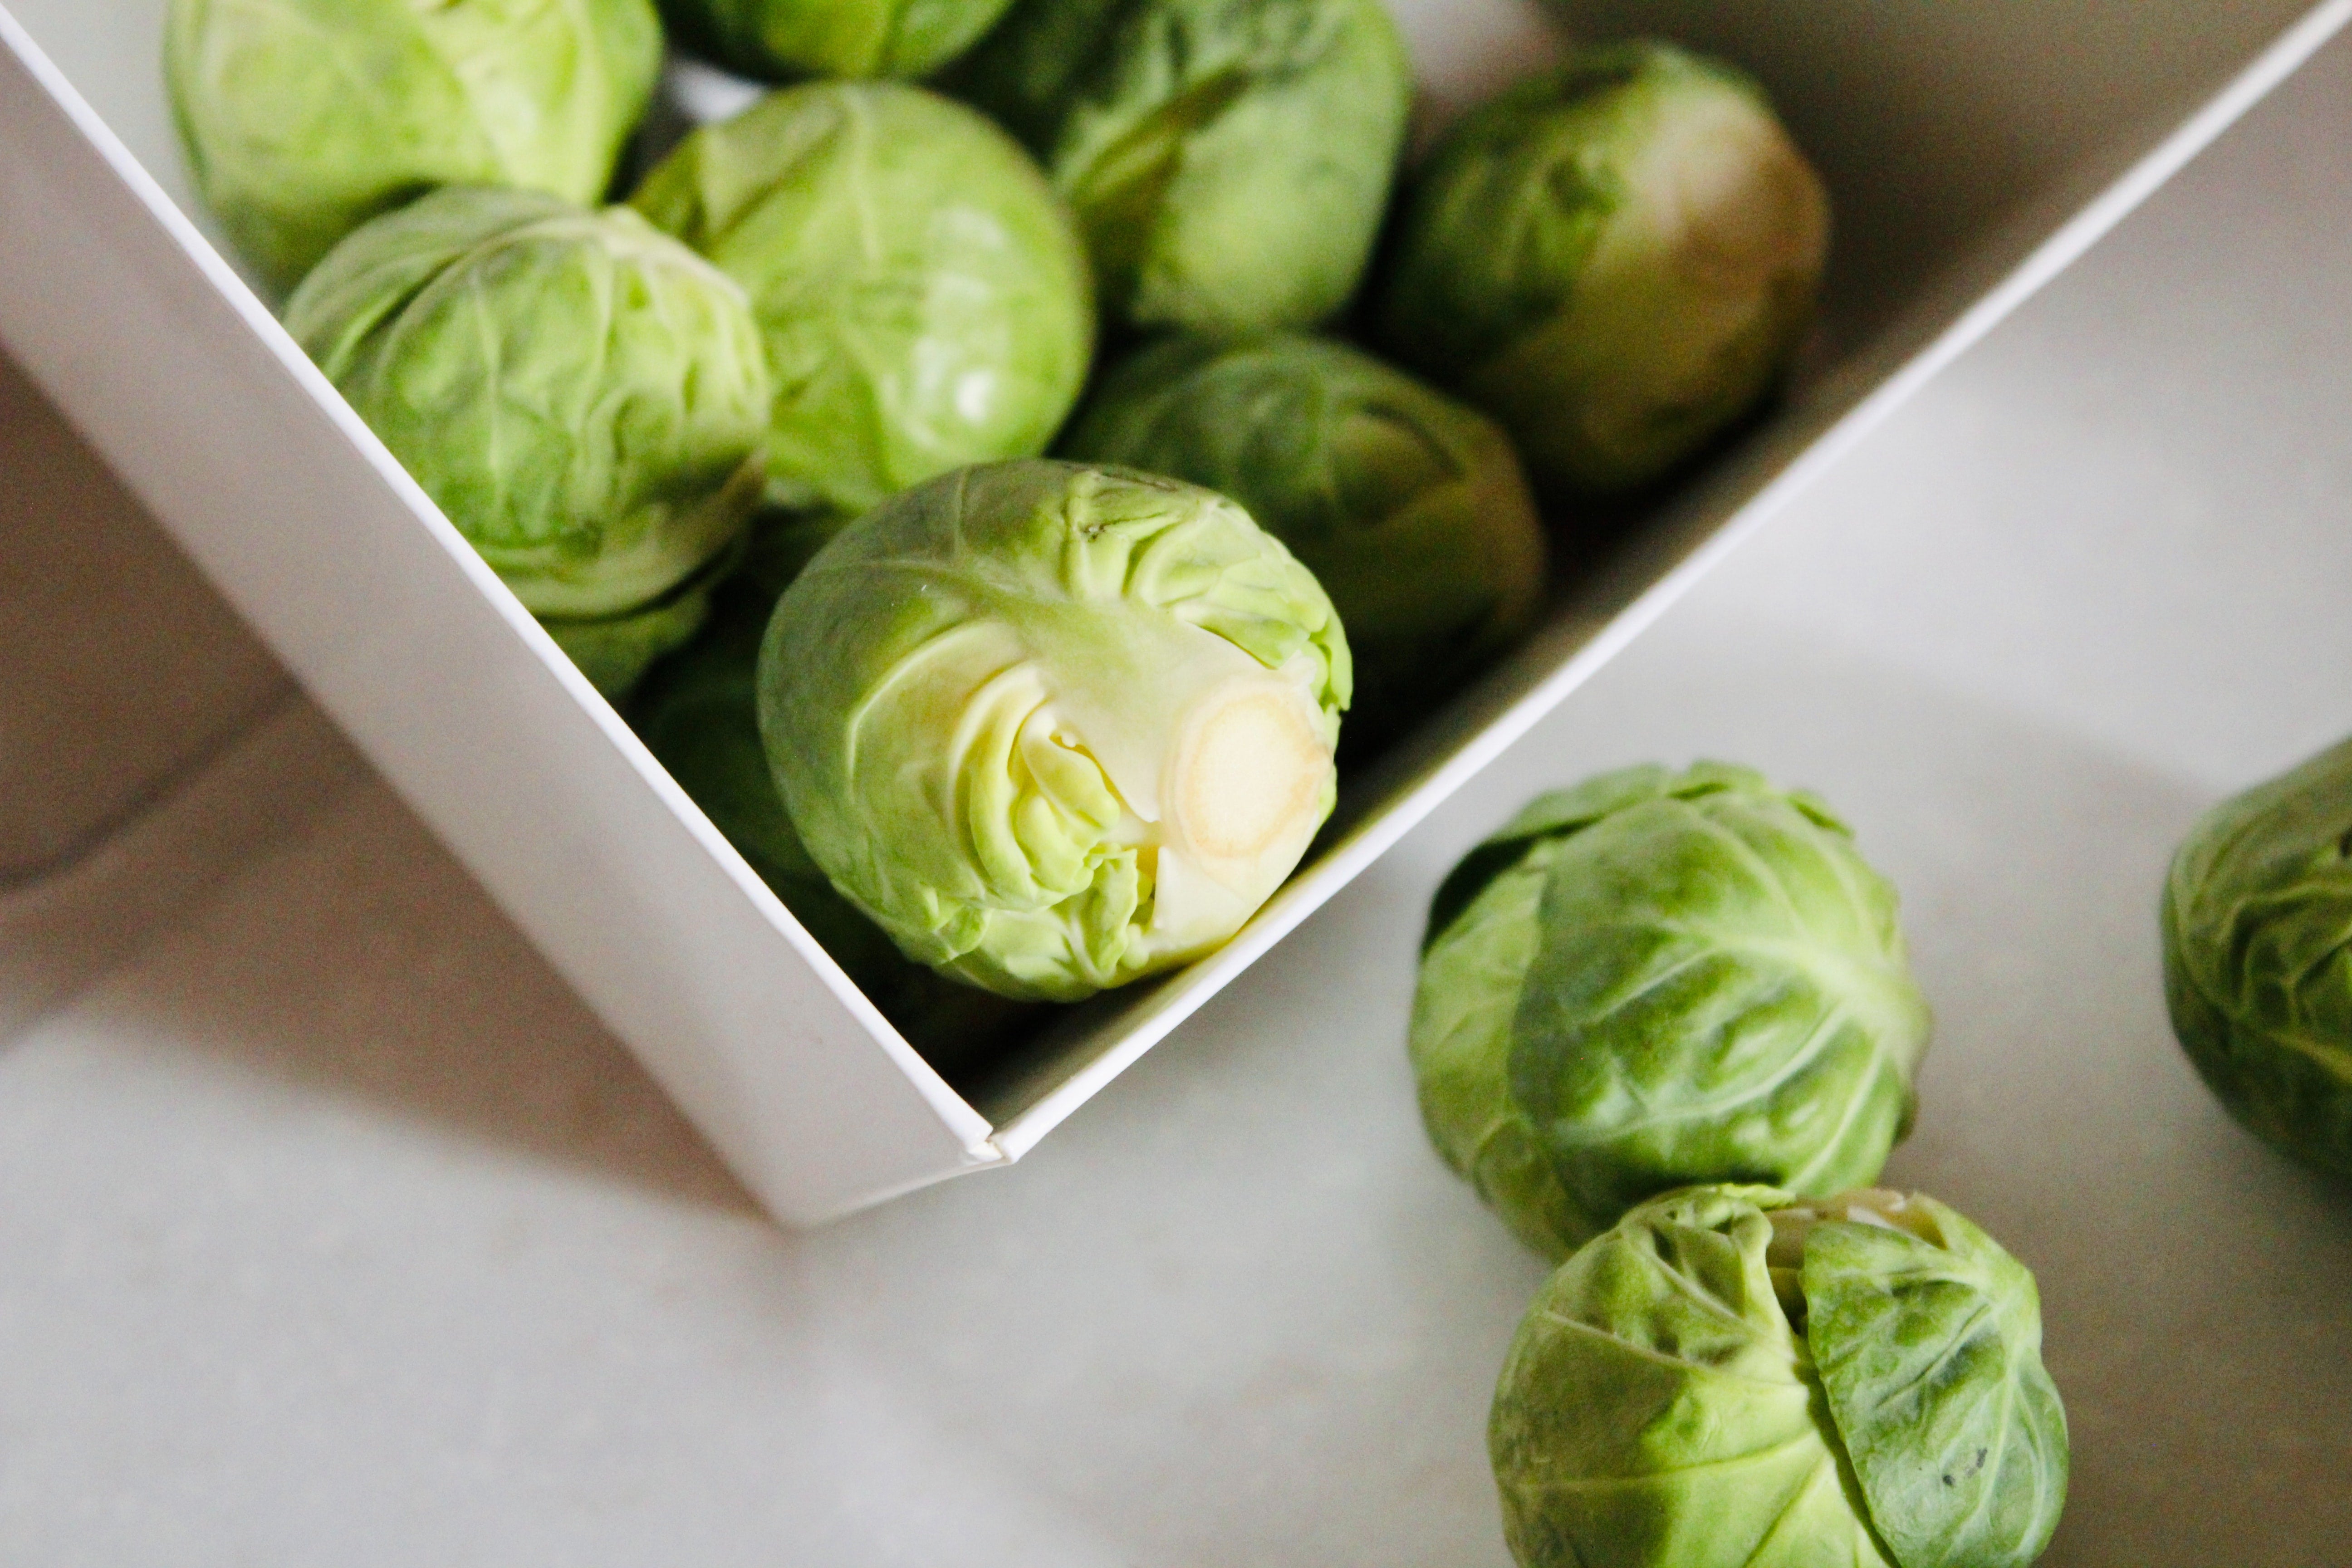 Gathered brussels sprouts for guinea pigs to eat